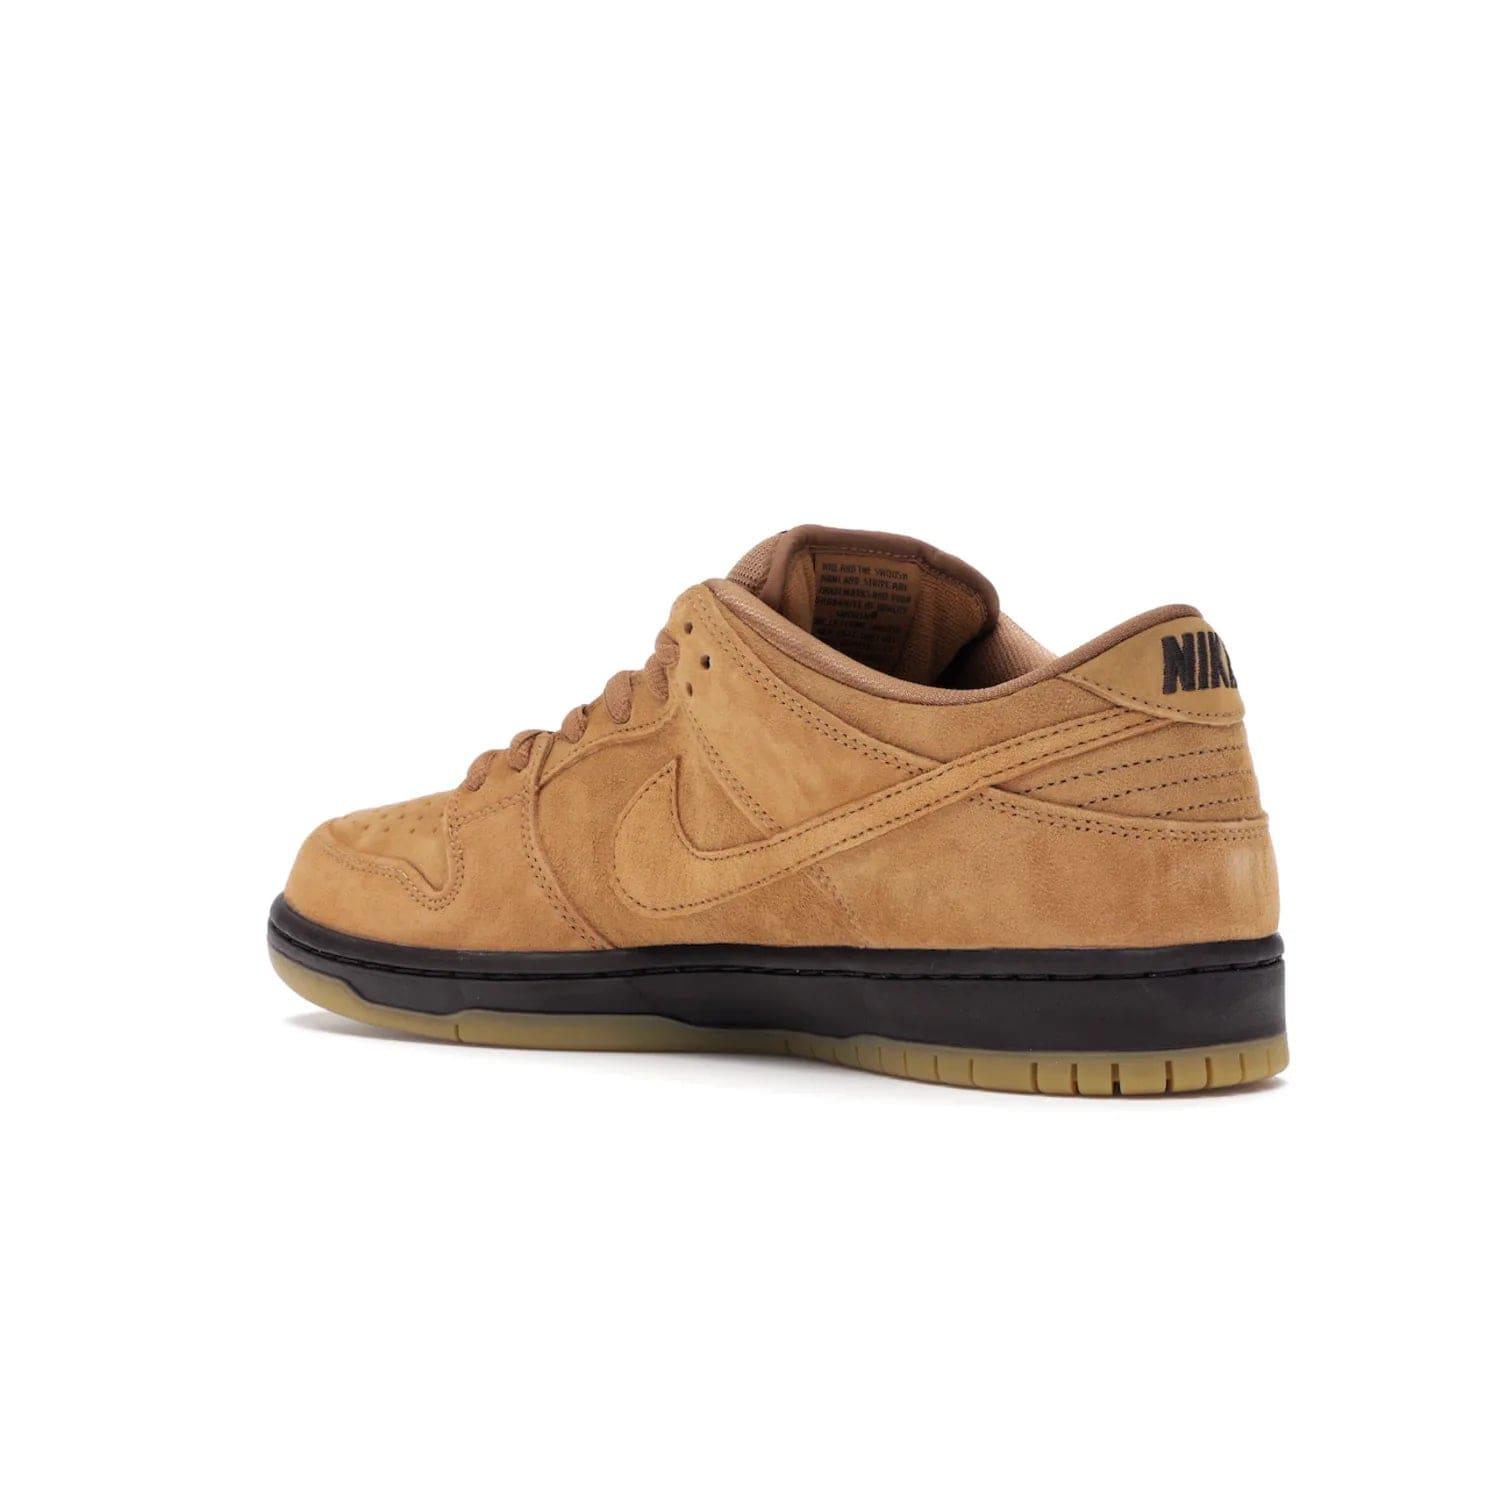 Nike SB Dunk Low Wheat (2021/2023) - Image 23 - Only at www.BallersClubKickz.com - The Nike SB Dunk Low Wheat (2021/2023)has a sleek silhouette and wheat suede upper. Tan tones for lining, mesh tongues, and laces. Iconic color palette midsole, perforated boxing toe. Brown branding on tongue and heel. Gum rubber outsole with partitioned pattern for traction. Eschewed in Feb 2021 for $110.